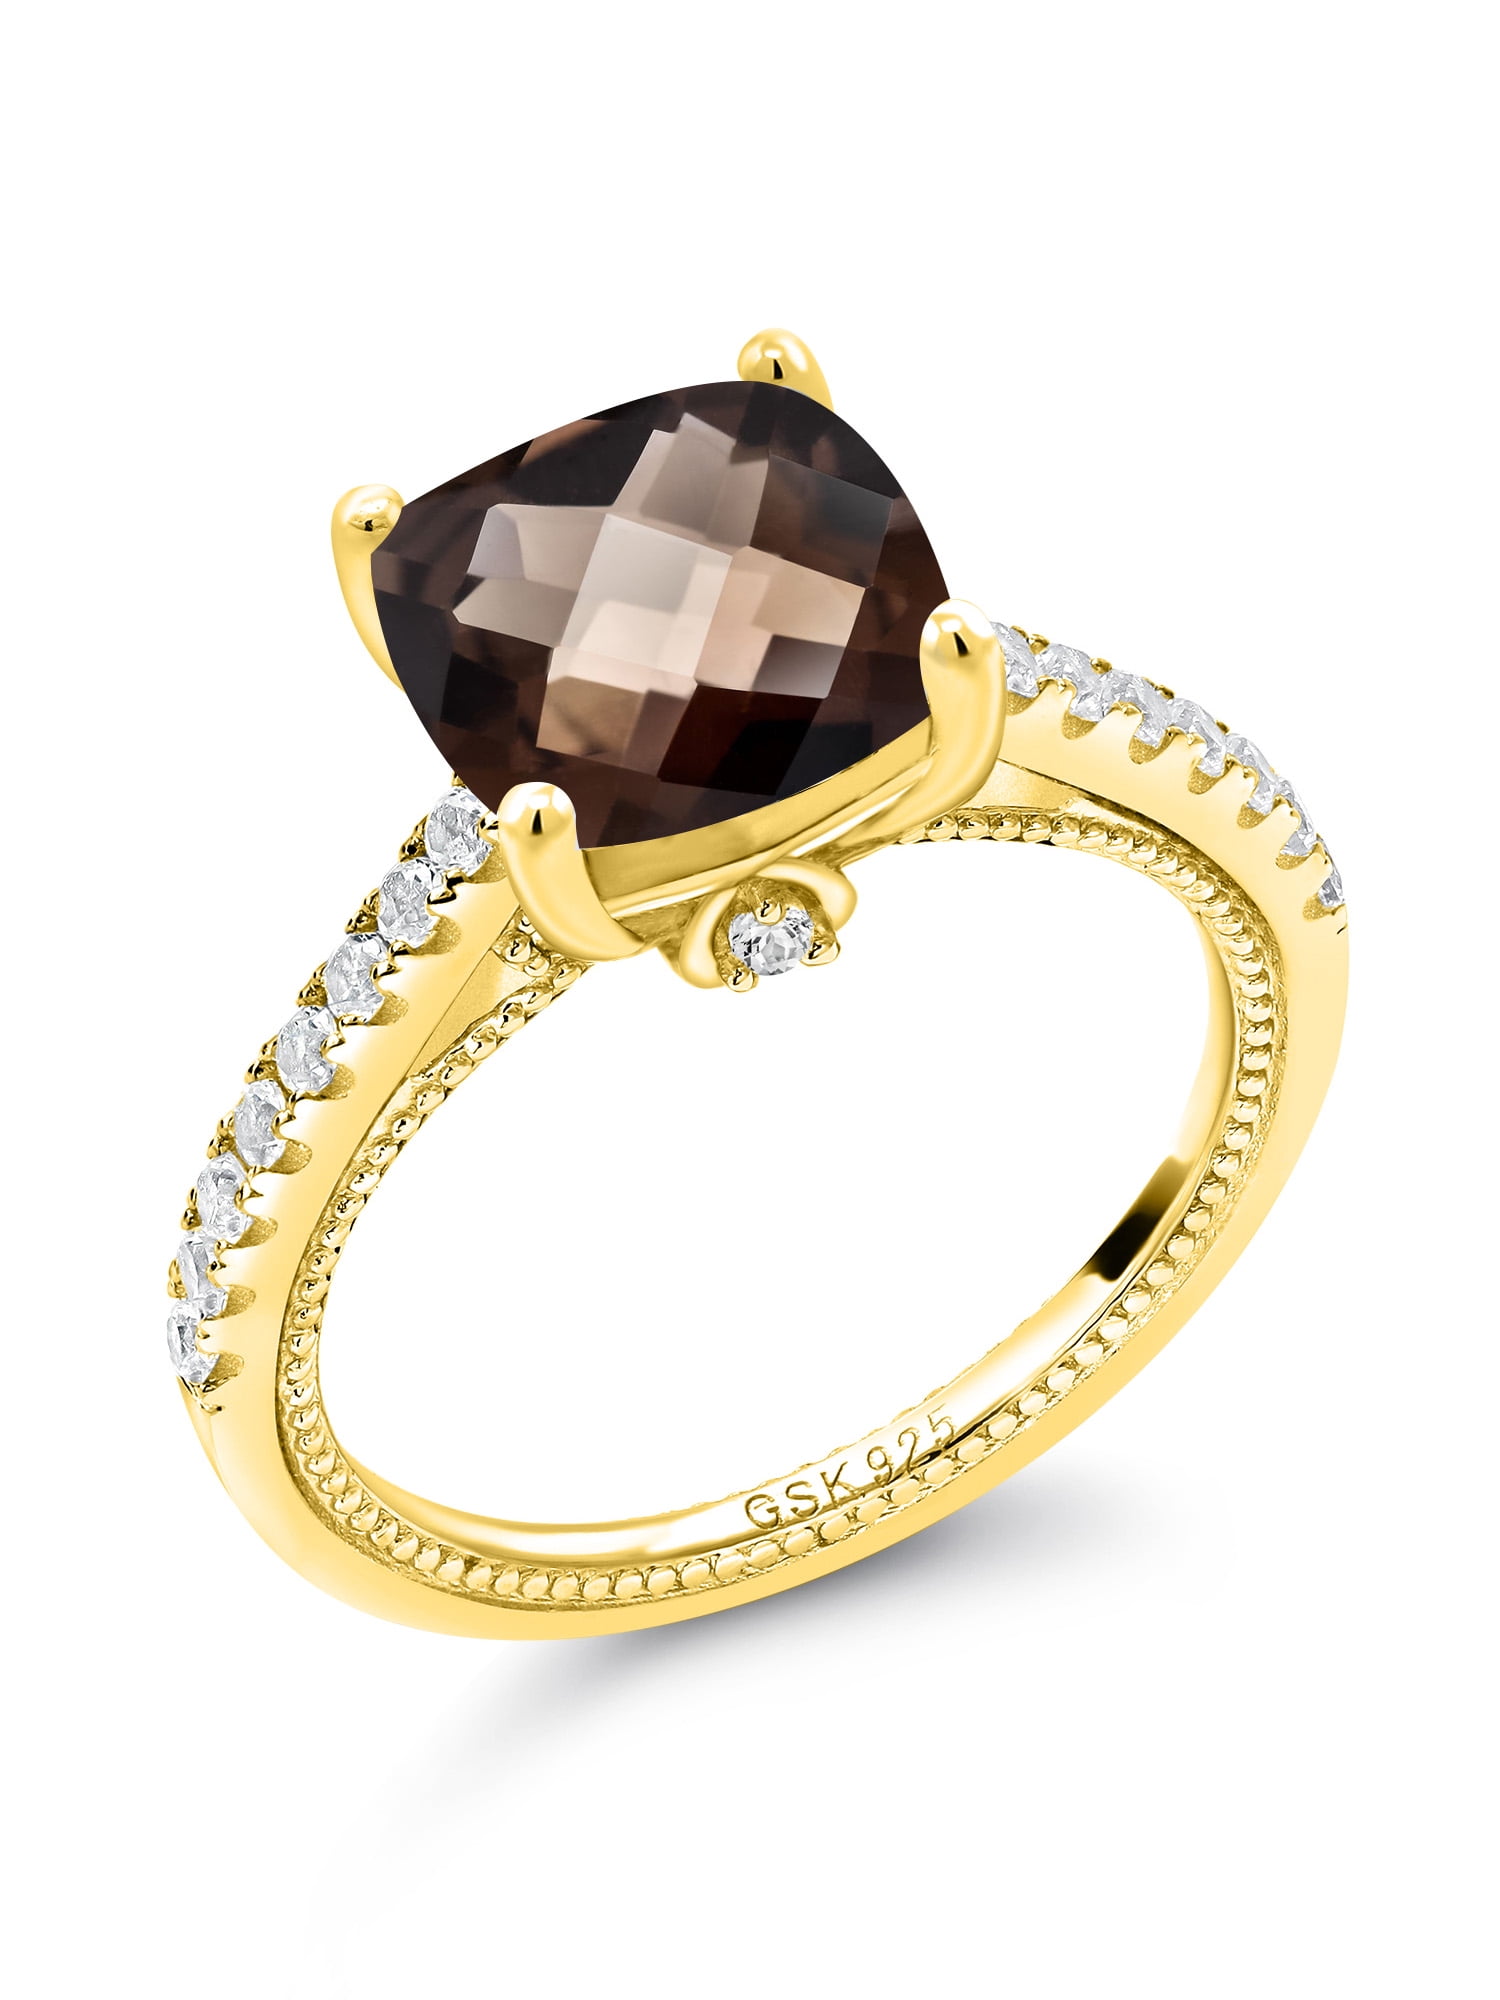 Gem Stone King 1.73 Ct Brown Smoky Quartz 18K Yellow Gold Plated Silver Mens Ring 